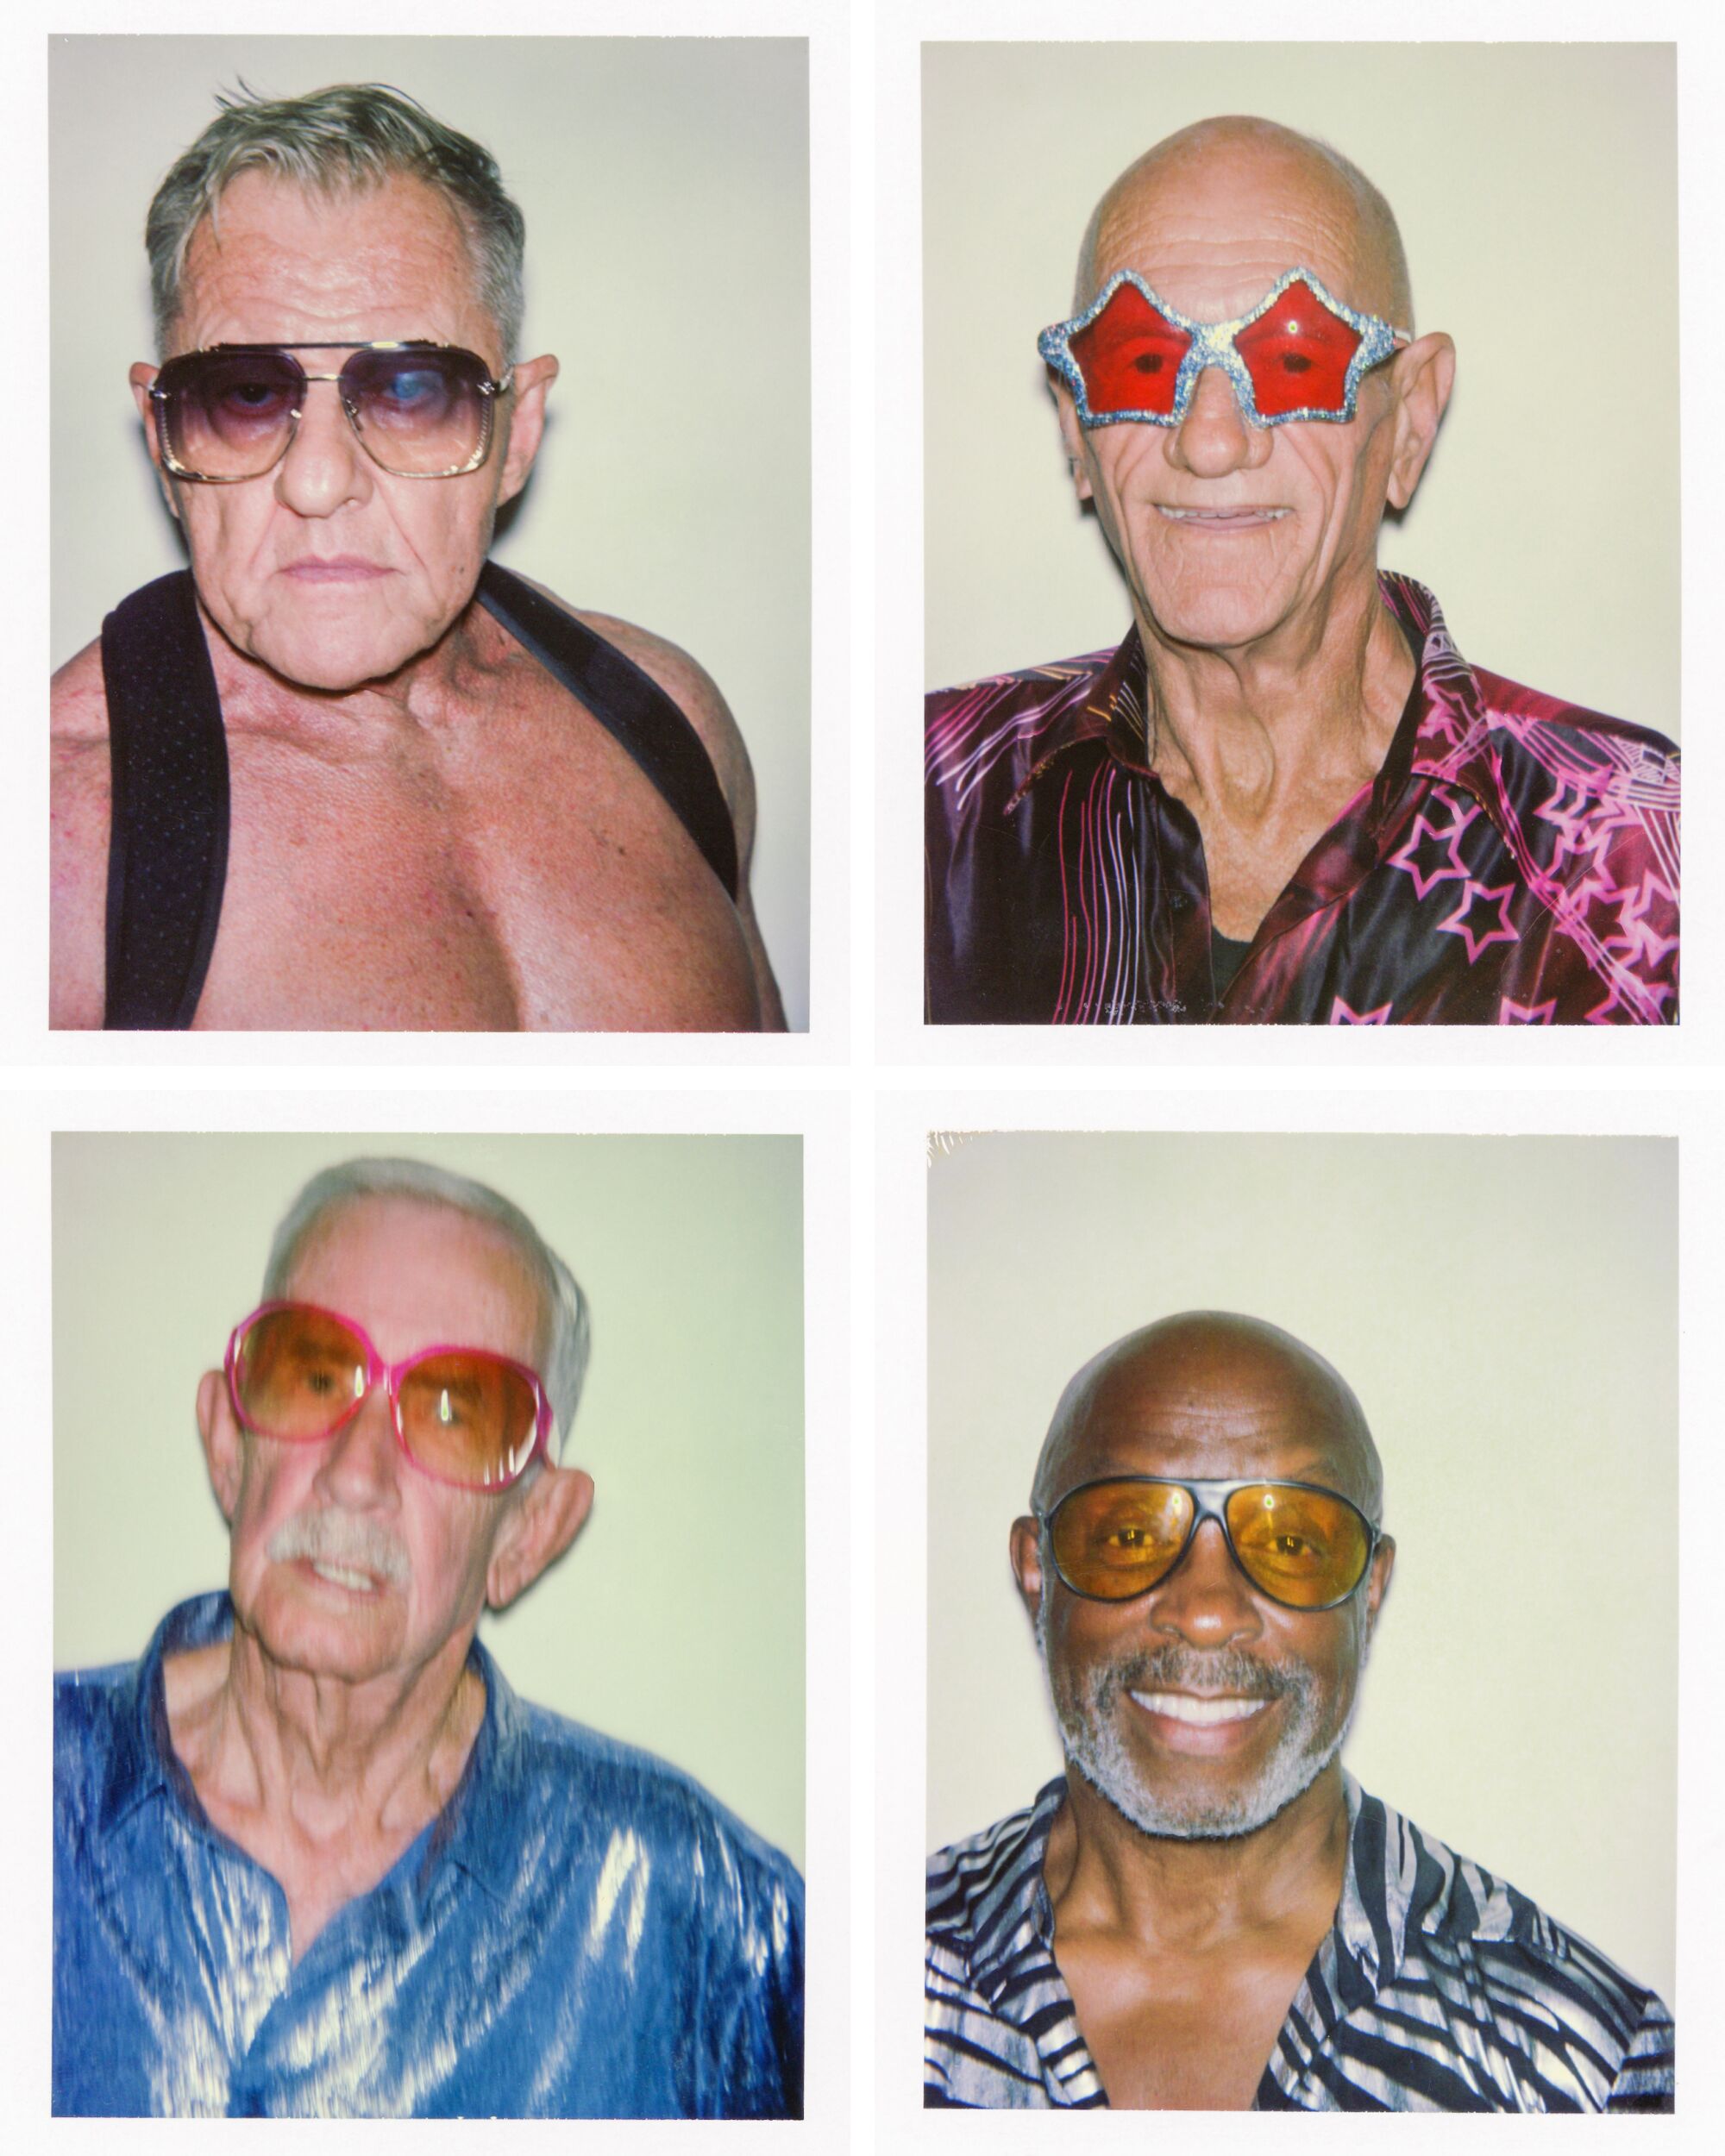 Four instant-photo headshots of old gay men wearing sunglasses, three in animal pattern shirts one wearing just suspenders.